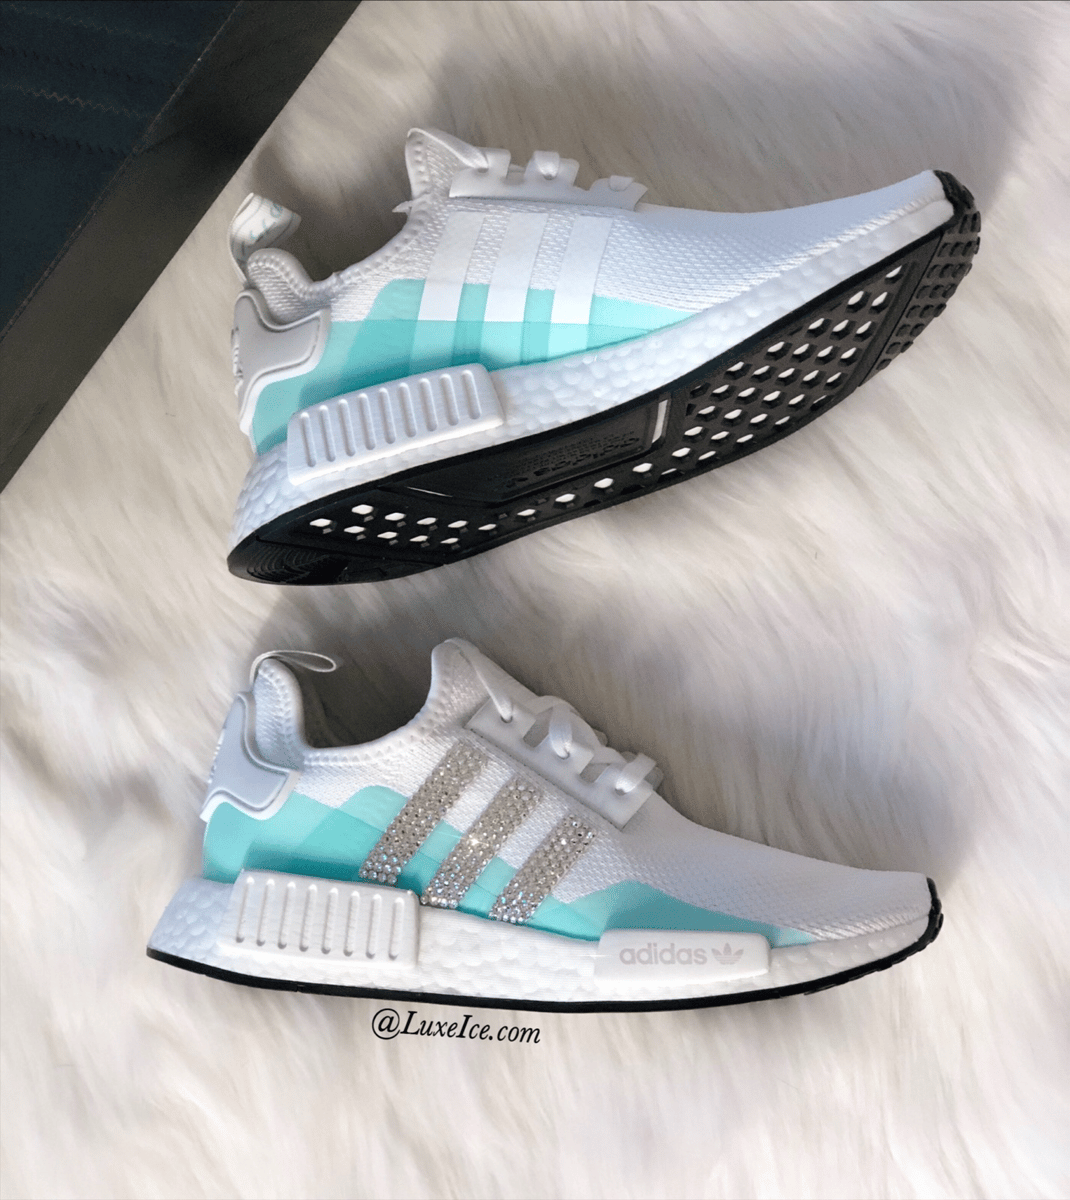 Adidas NMD R1 Coud White/Clear Mint customized with Swarovski Crystals ...